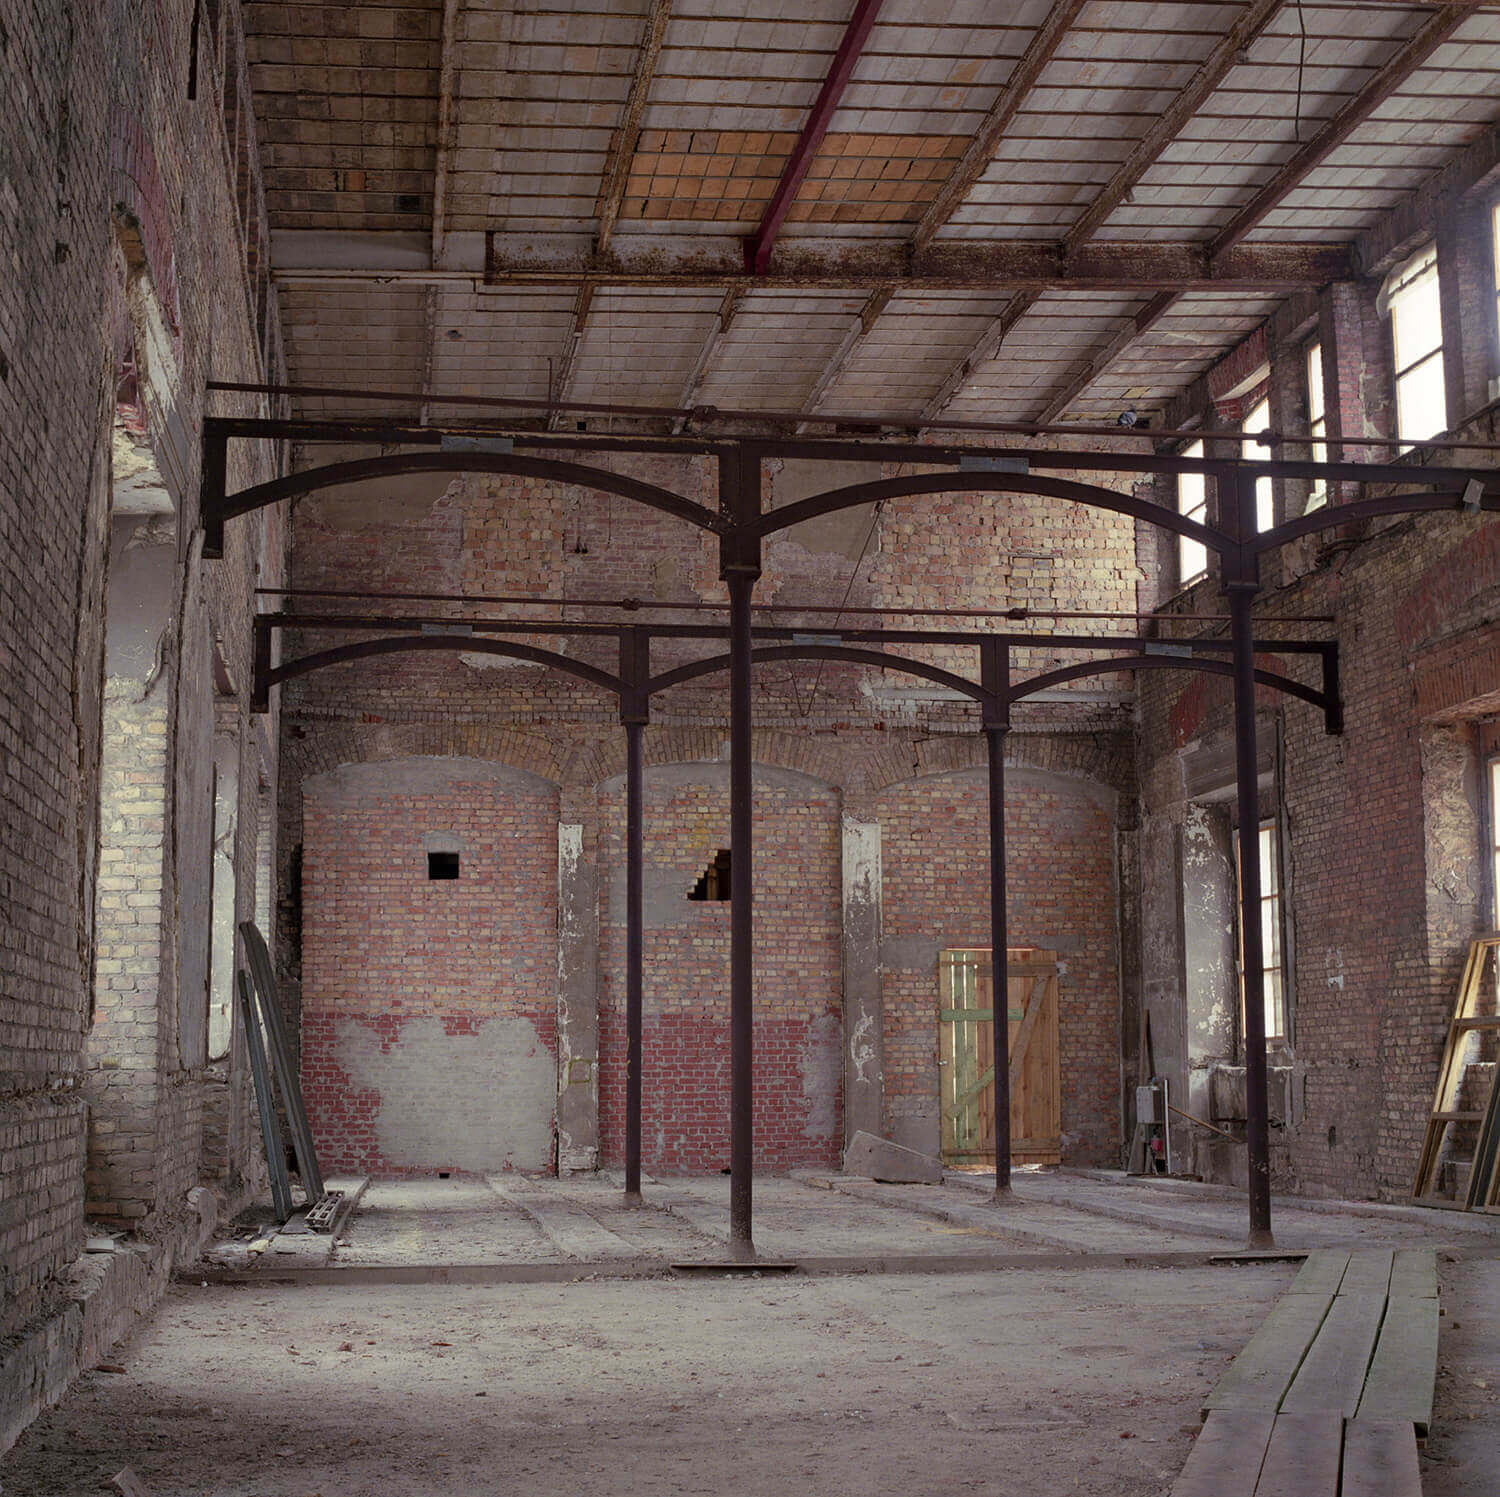 Jenö Gindl, ohne Titel 9, 1992/2009, C-print, 29 x 29 cm, from the series Neues Museum